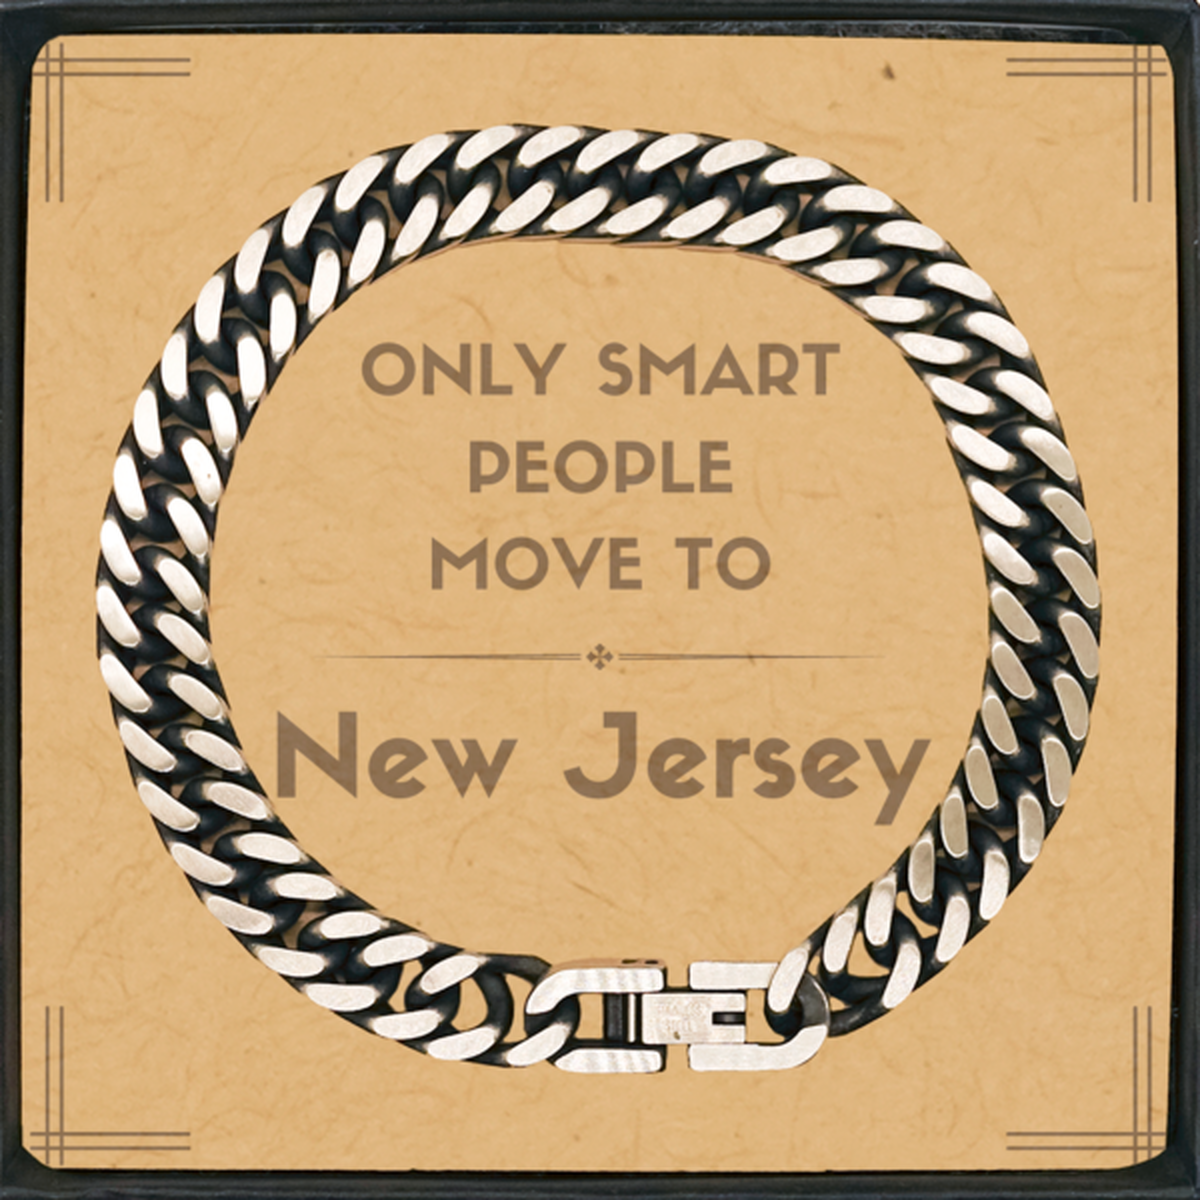 Only smart people move to New Jersey Cuban Link Chain Bracelet, Message Card Gifts For New Jersey, Move to New Jersey Gifts for Friends Coworker Funny Saying Quote